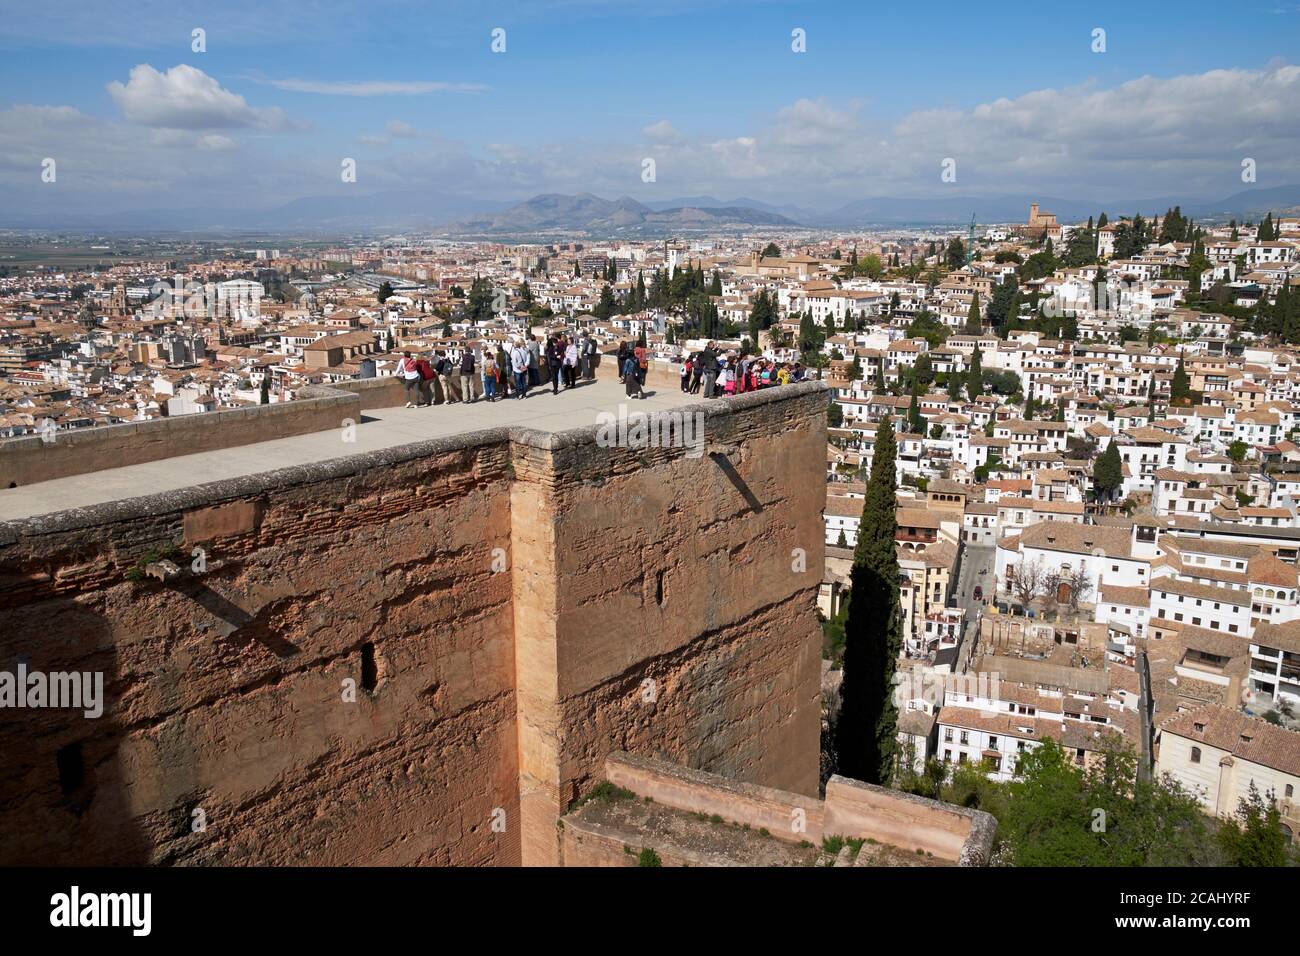 The Arms Tower in the Alcazaba, Alhambra, Granada, Andalusia, Spain. Stock Photo